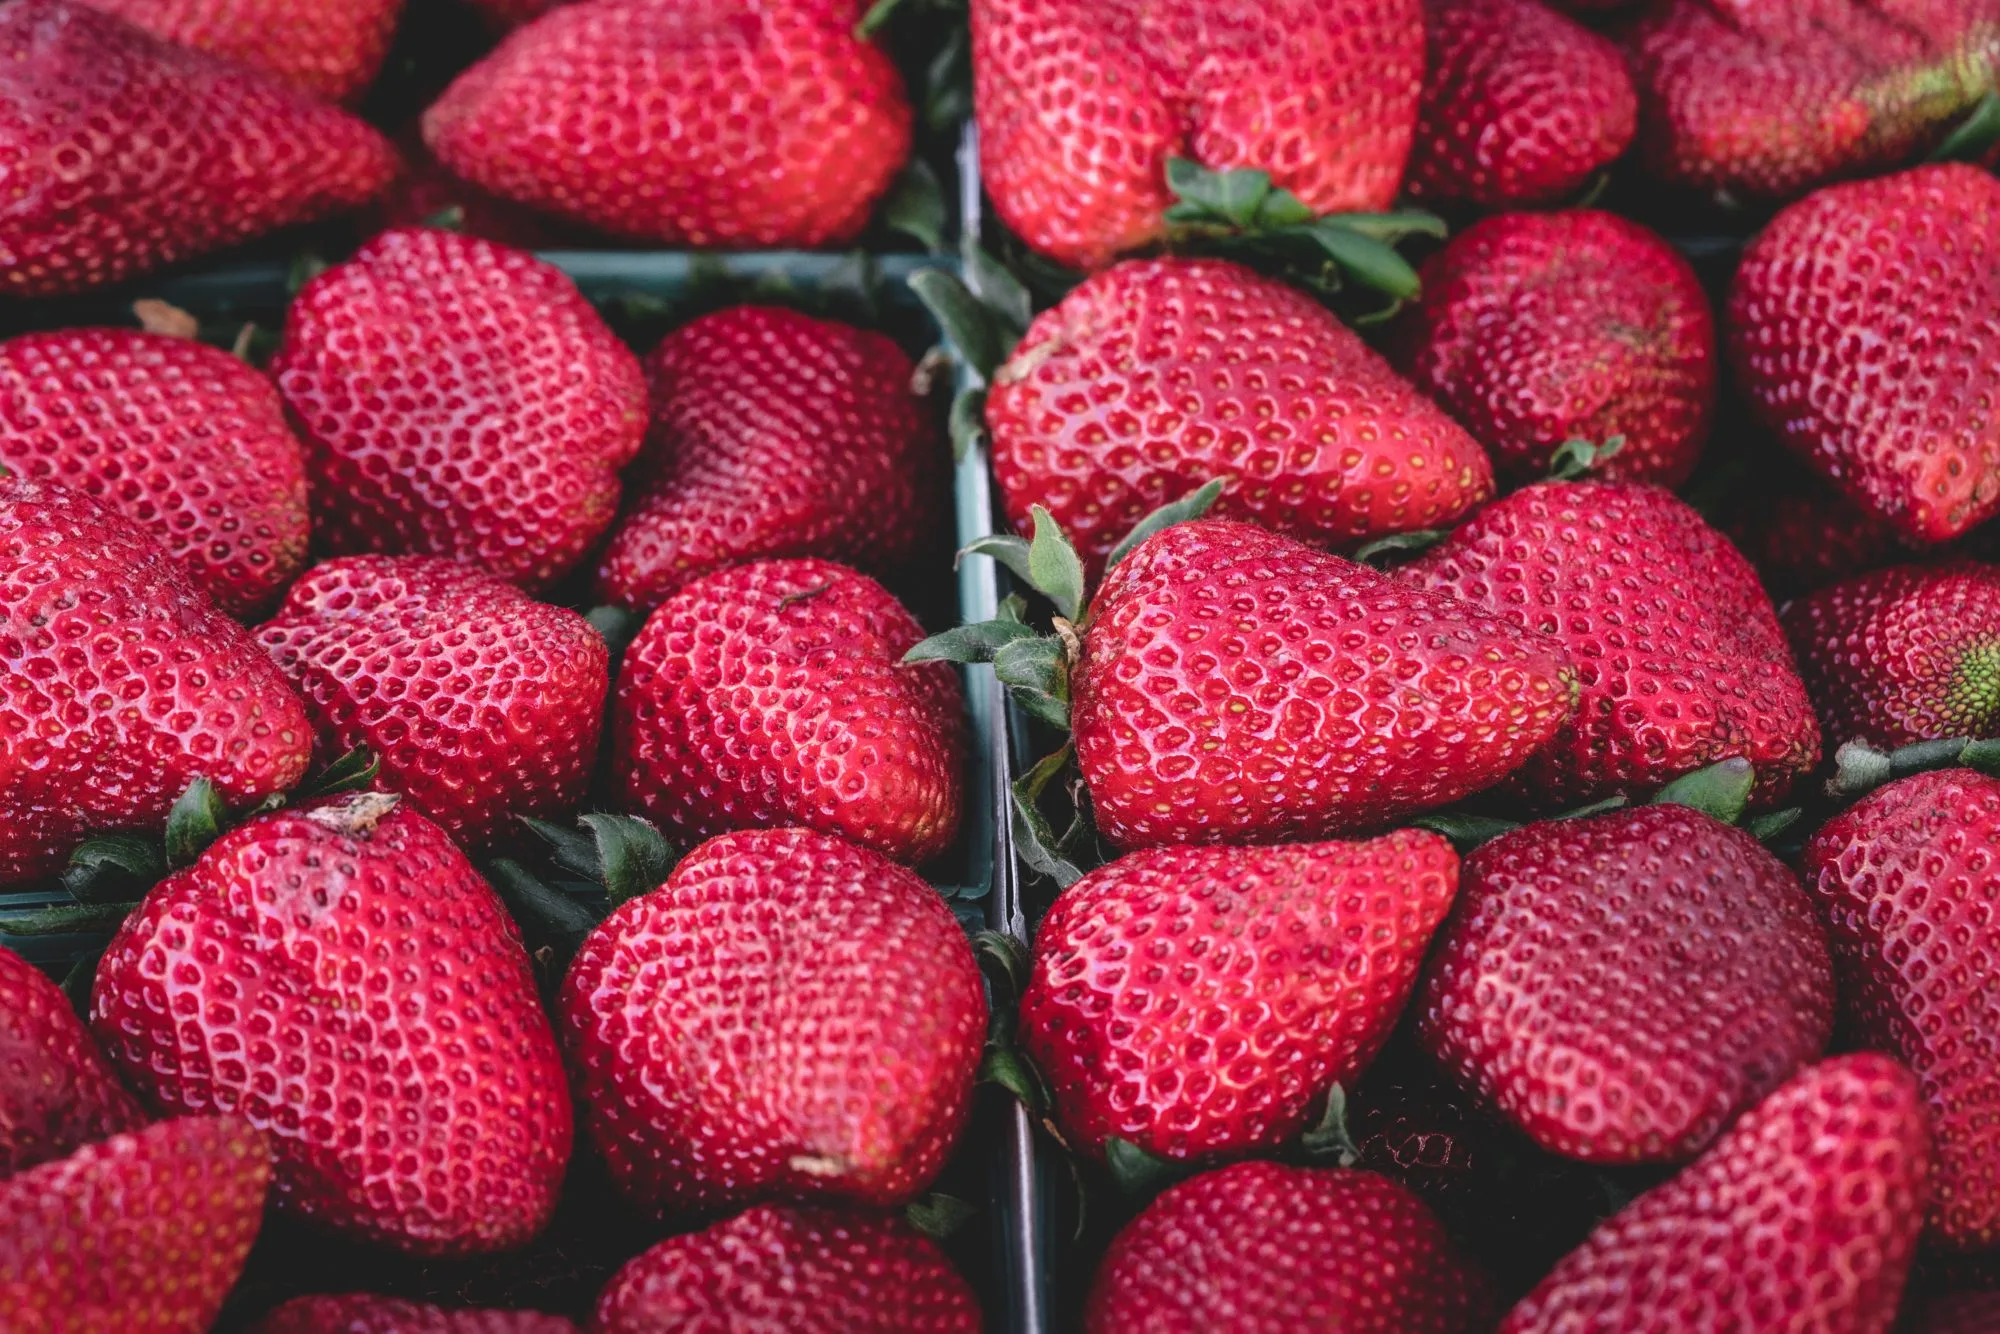 Strawberries Secret: Can They Be Key To Gut Health?